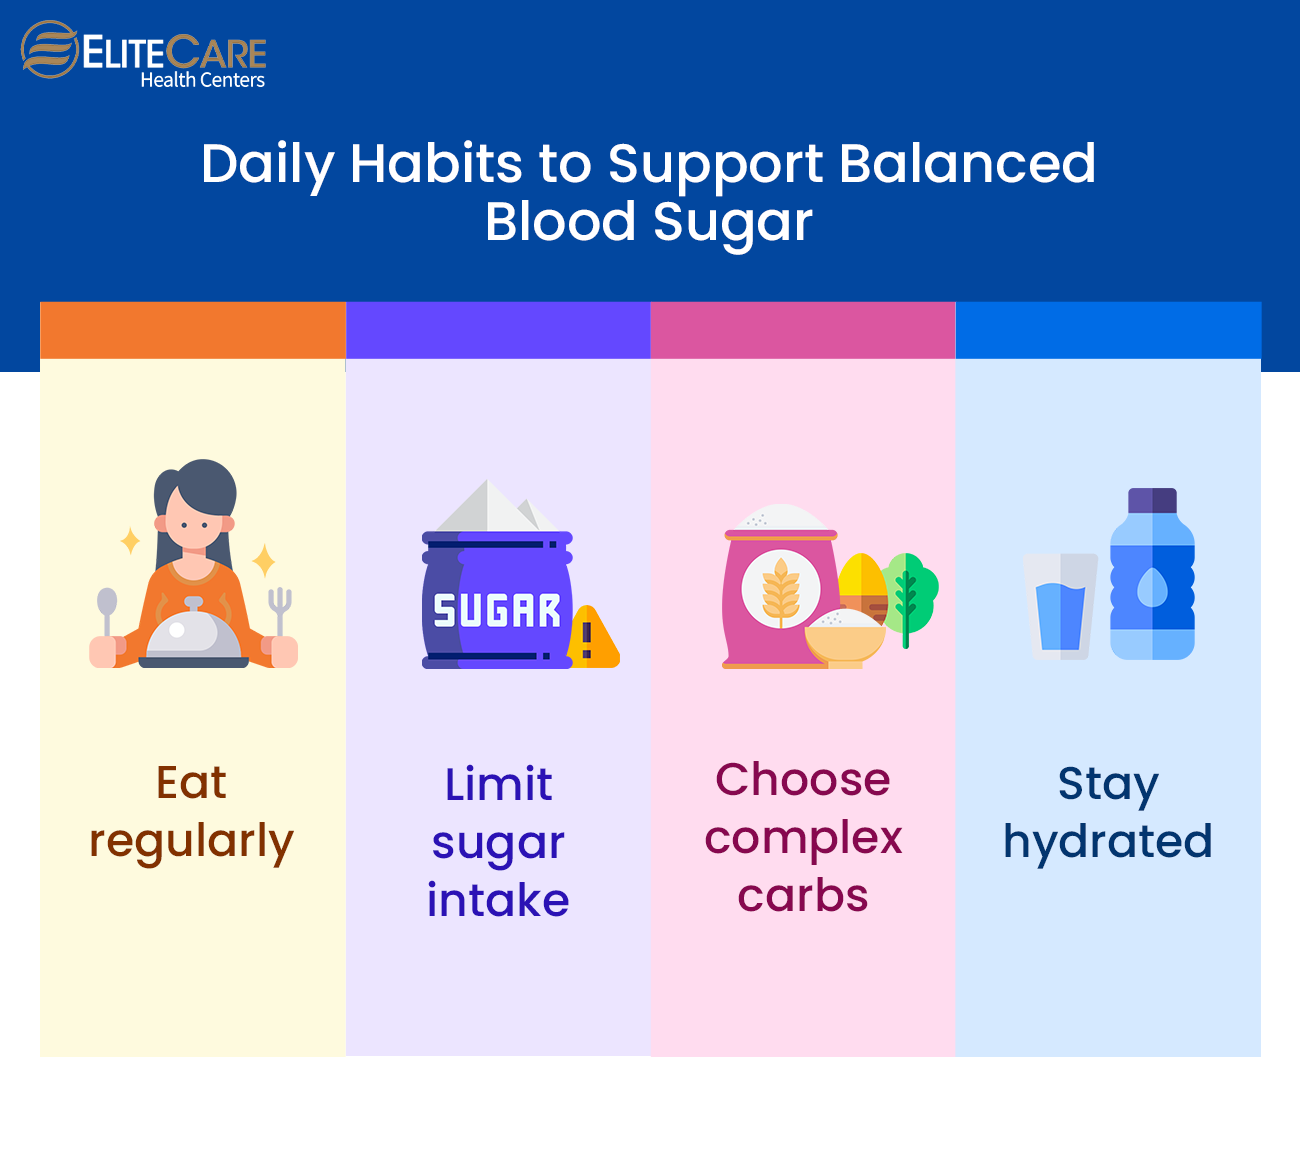 Daily Habits to Support Balanced Blood Sugar